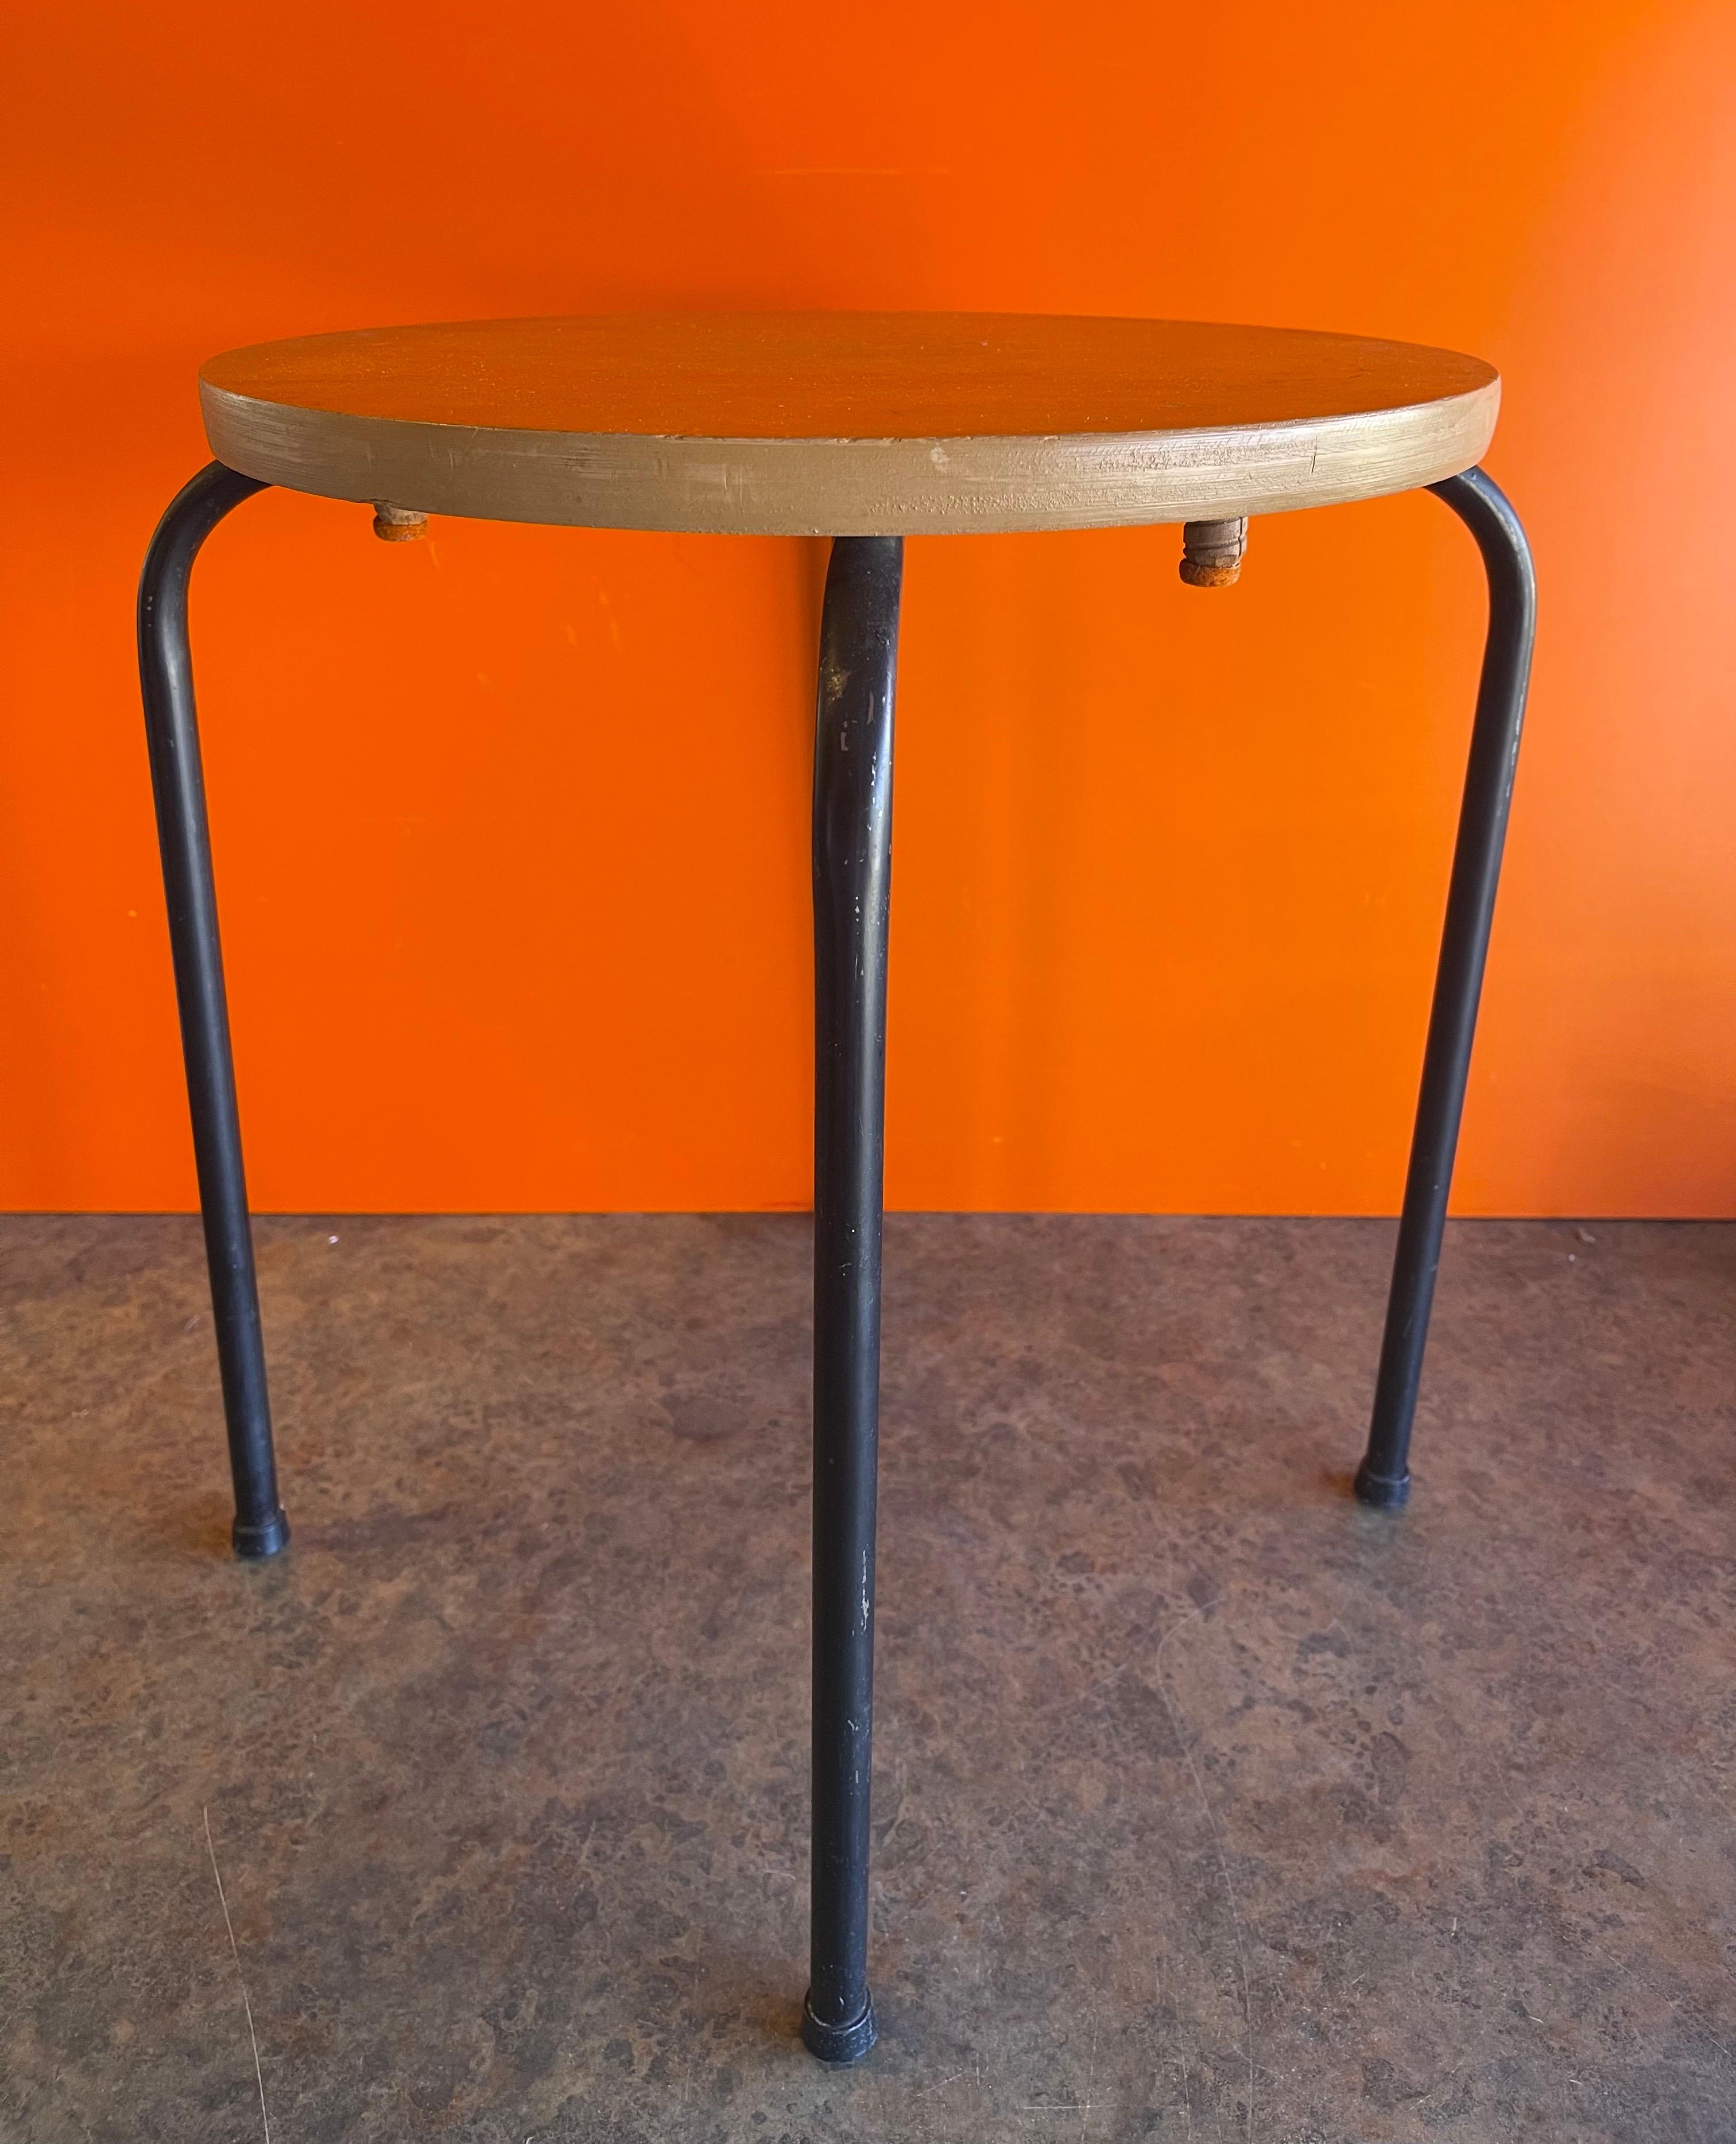 Small mid-century round maple top table with four black metal legs, circa 1960s. The table measures 17.25